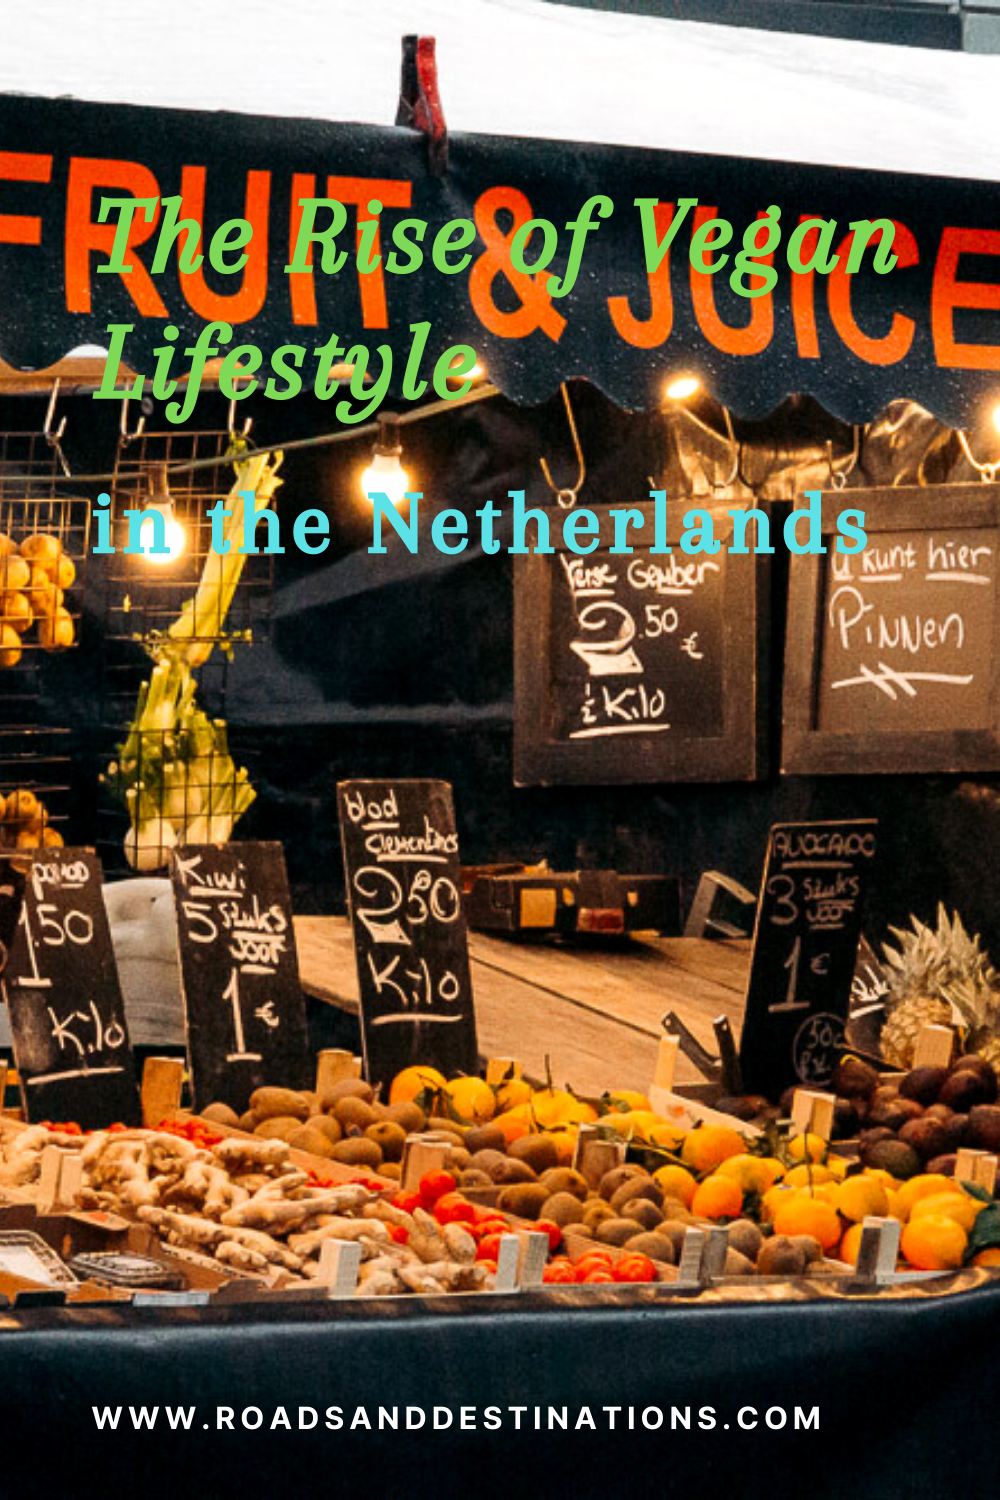 The Rise of Vegan Lifestyle in the Netherlands- Roads and Destinations roadsanddestinations.com